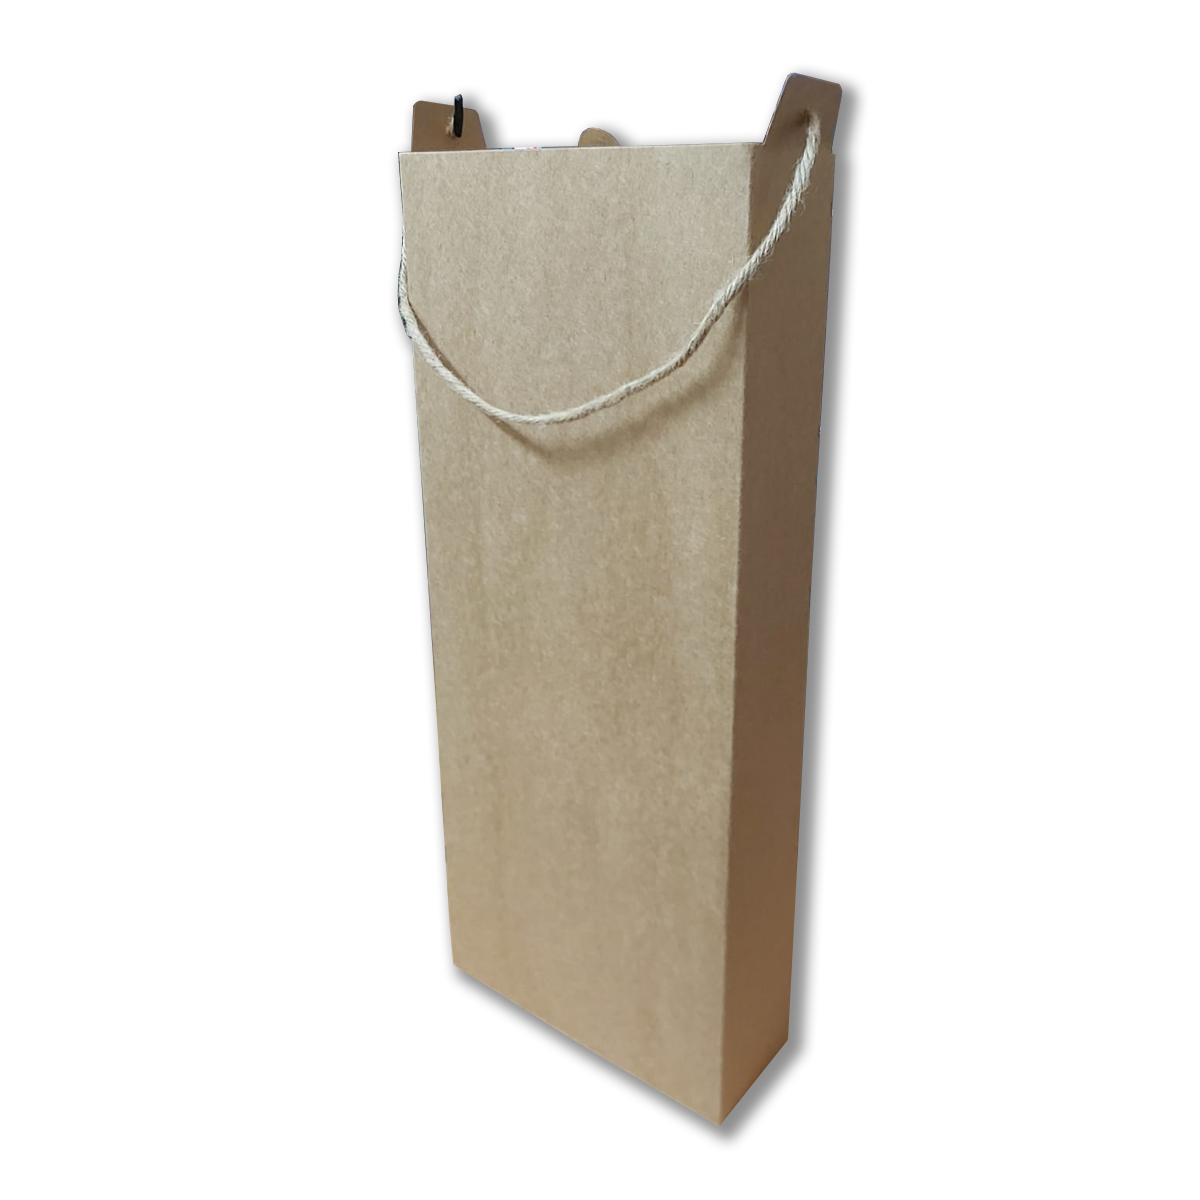 12Pc Pack Jute Rope Handle Kraft Cardboard Boxes with Sliding Top 36x16x5.5 Cms - Willow